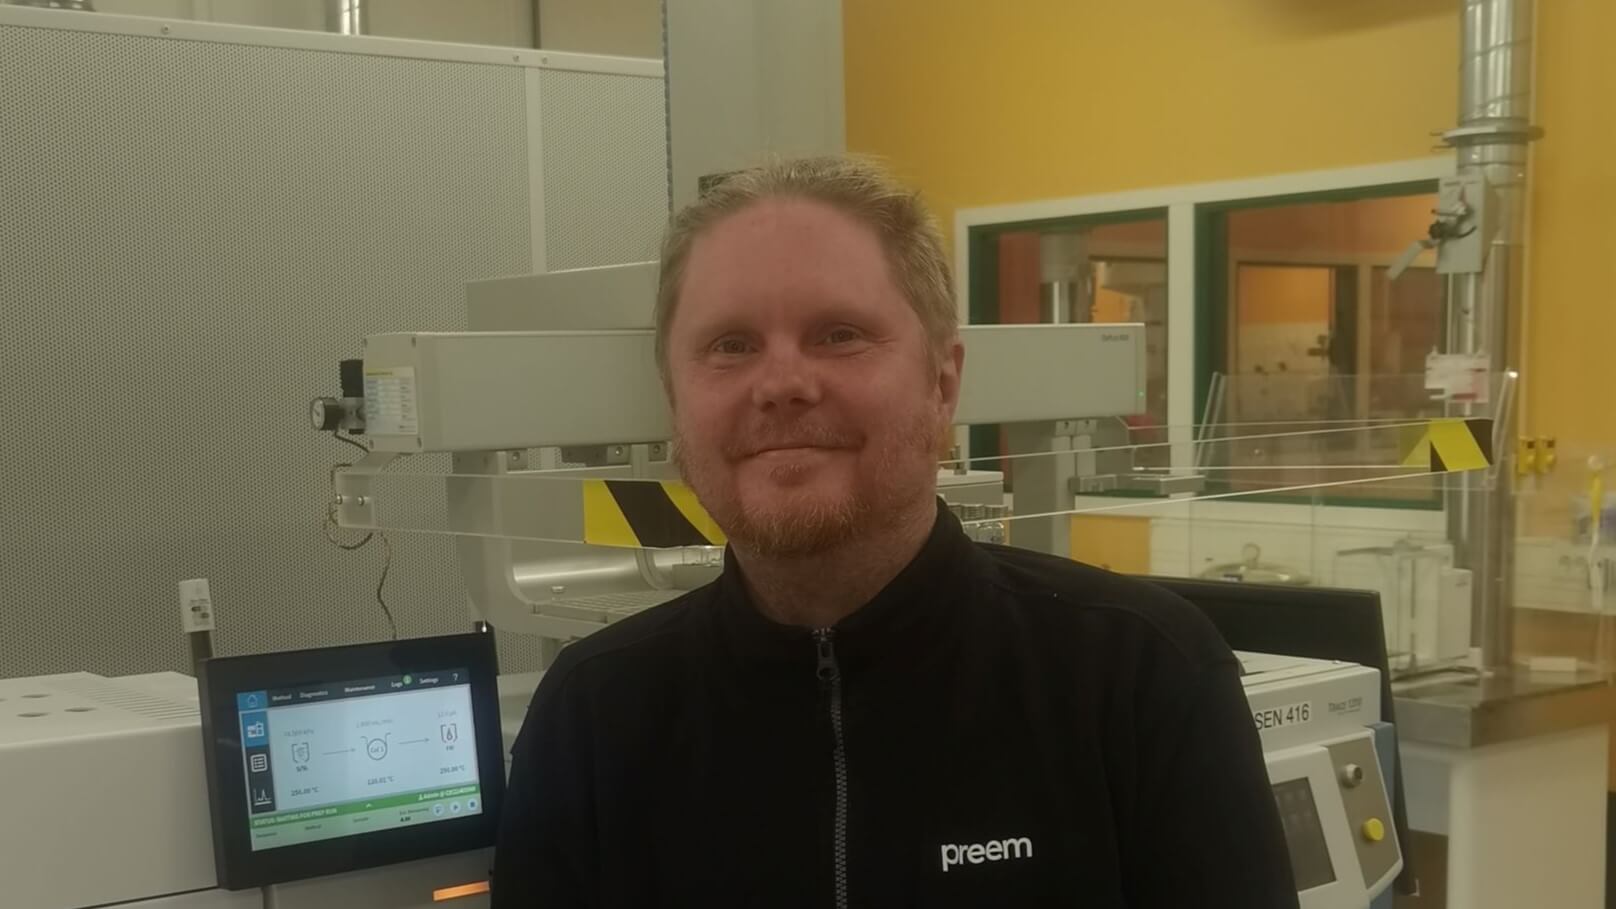 Head and shoulders photo of Mattias Gustafsson with lab equipment in the background